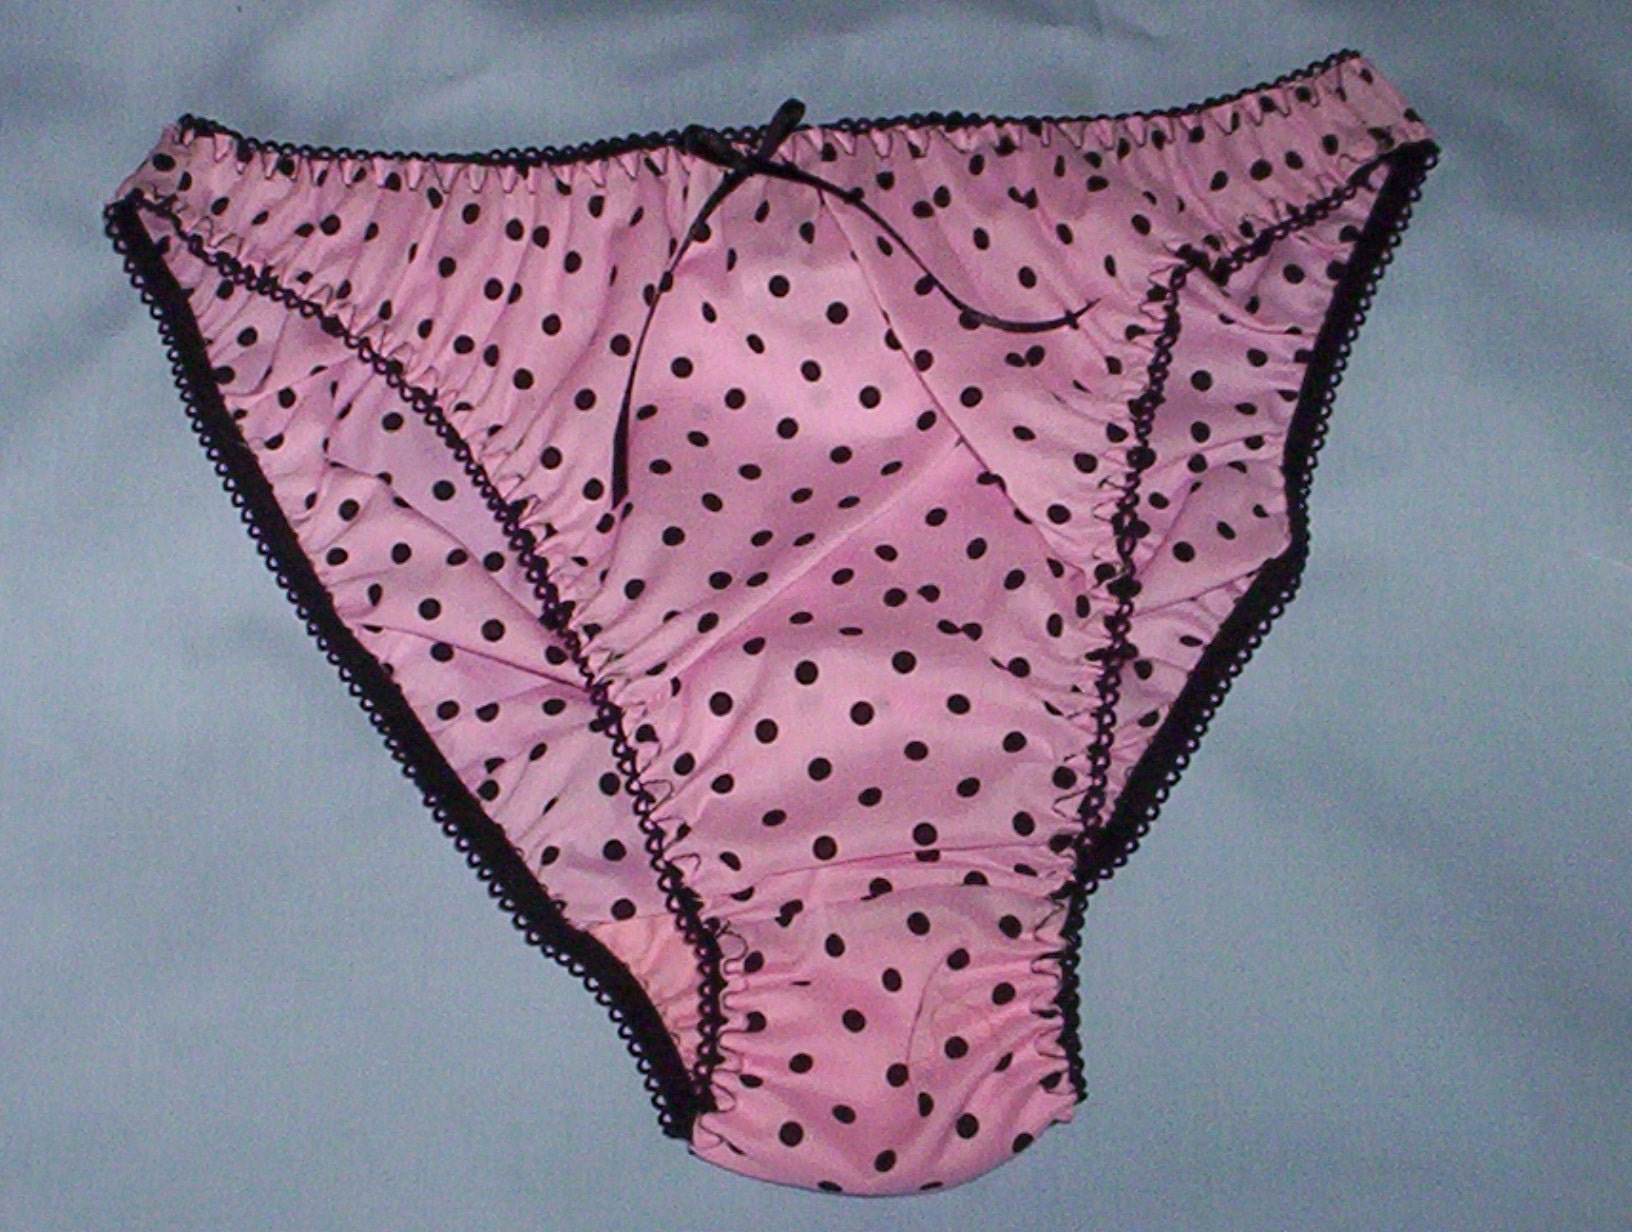 Pink With Black Polka Dot Cotton Panties By Tigerlizzylou On Etsy